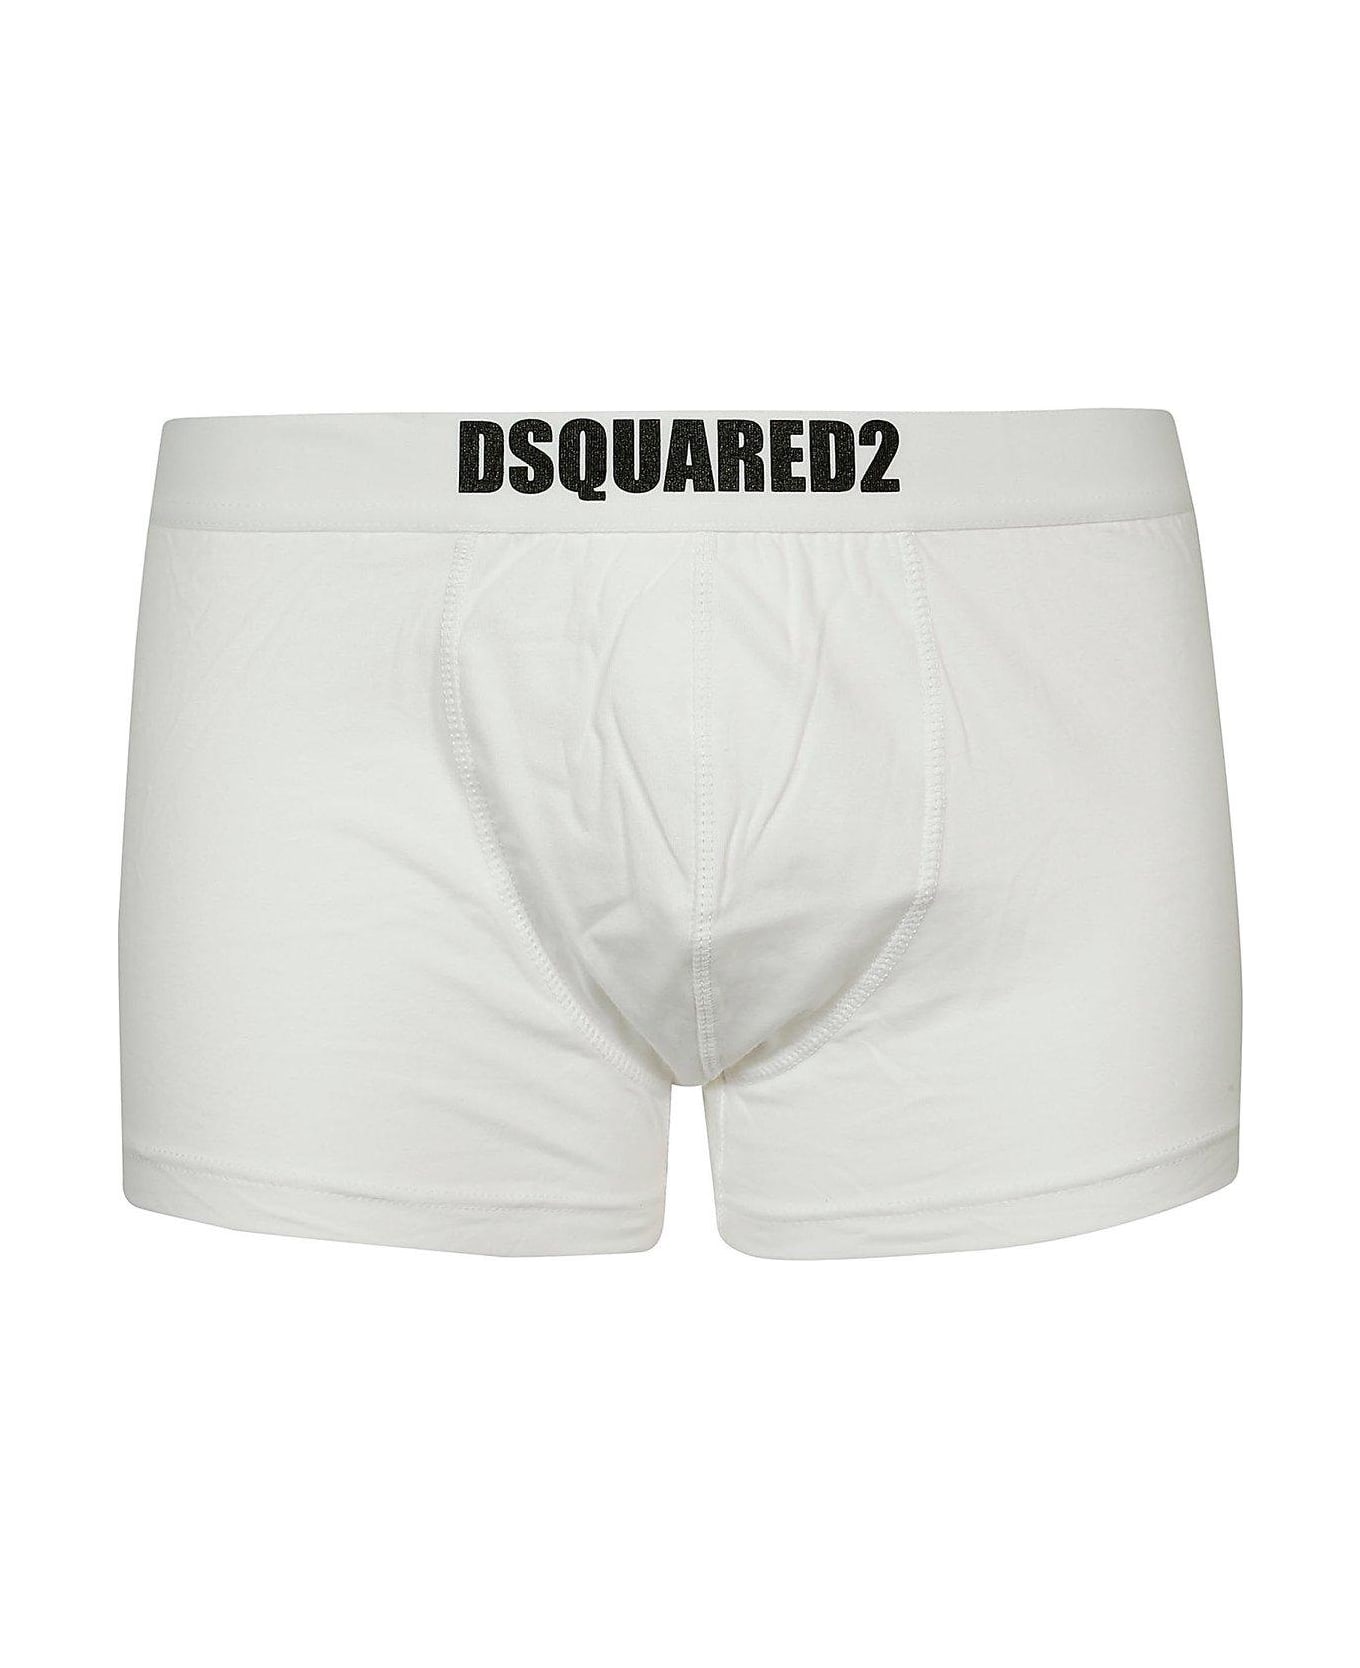 Dsquared2 Logo Printed Two Packs Of Boxers - White